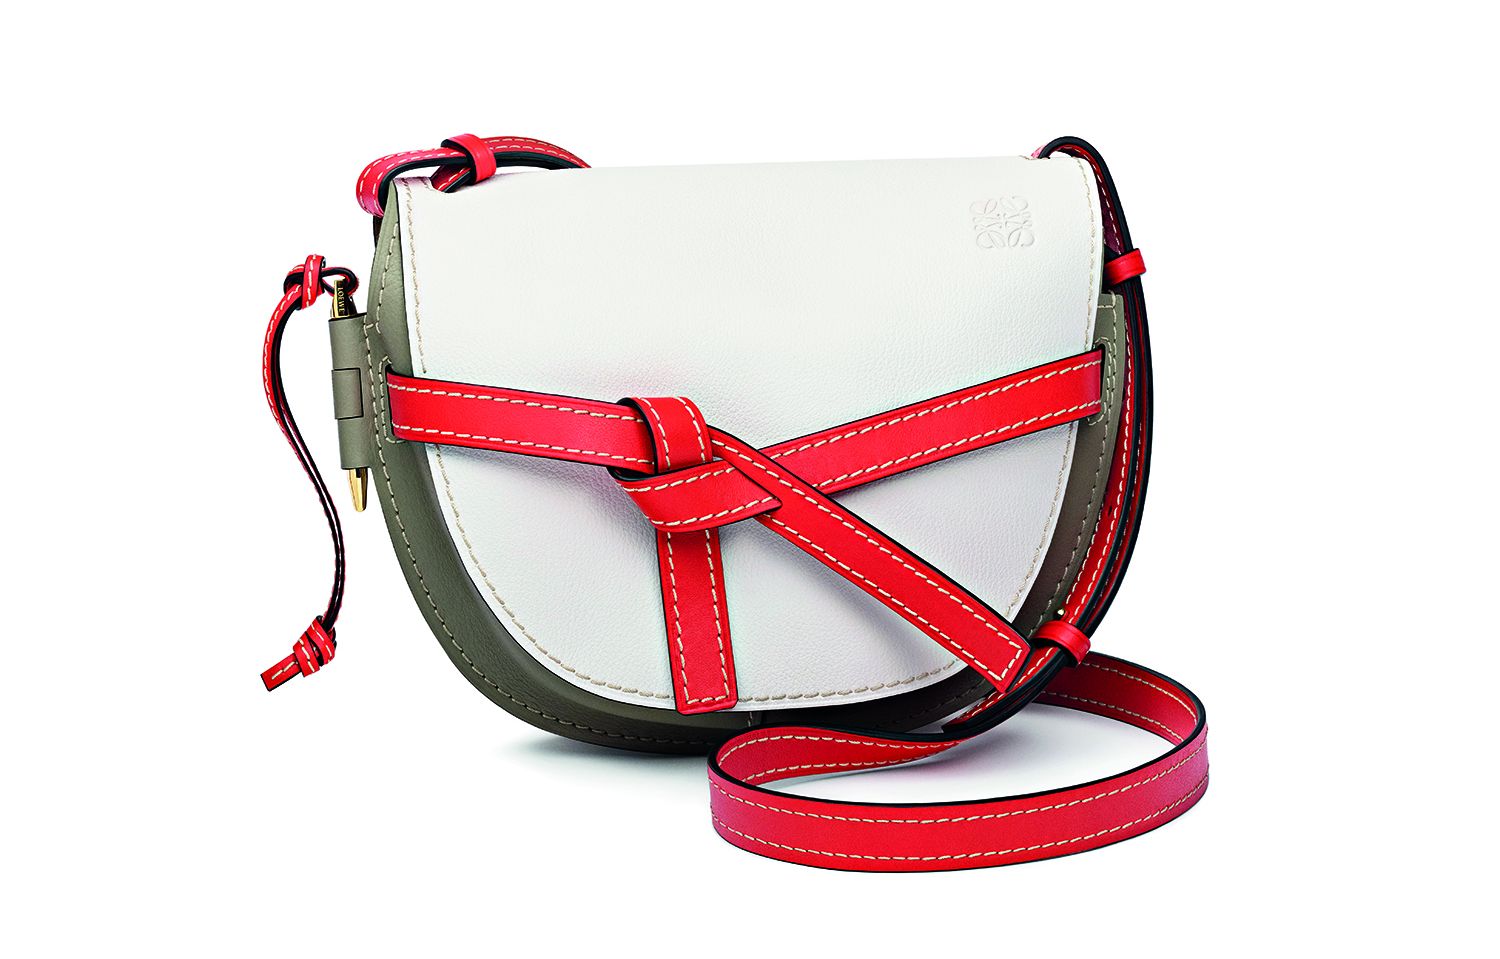 Loewe’s White and Grey Calf Gate bag adds pizazz to a summer wardrobe.